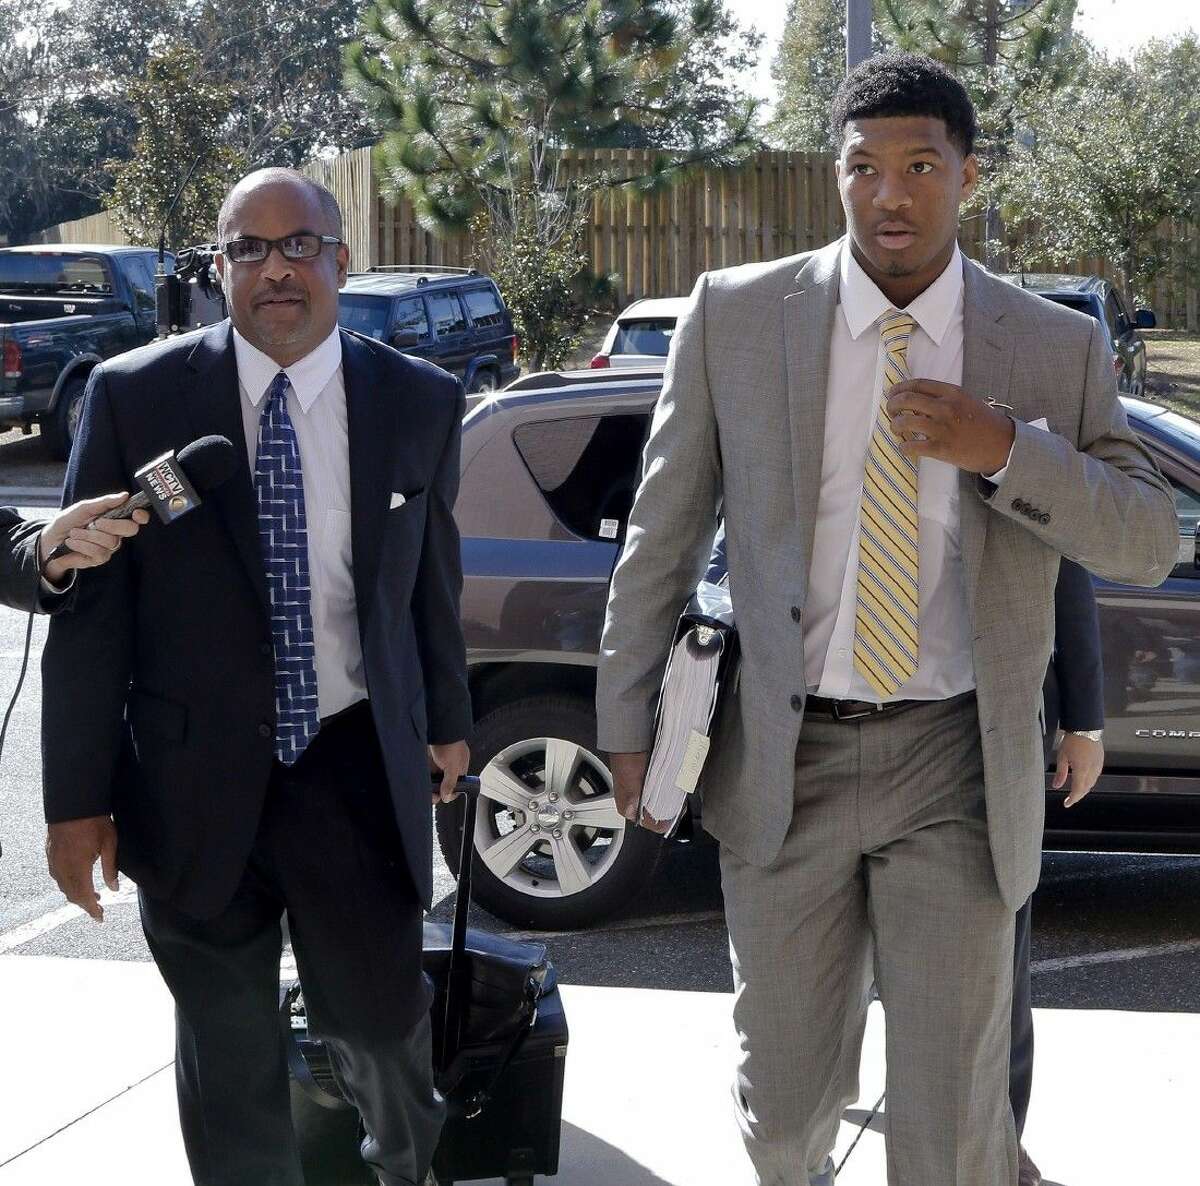 Florida State quarterback Jameis Winston, right, and his attorney David Cornwell arrive at Florida State's Materials Research building for his student code on conduct hearing.